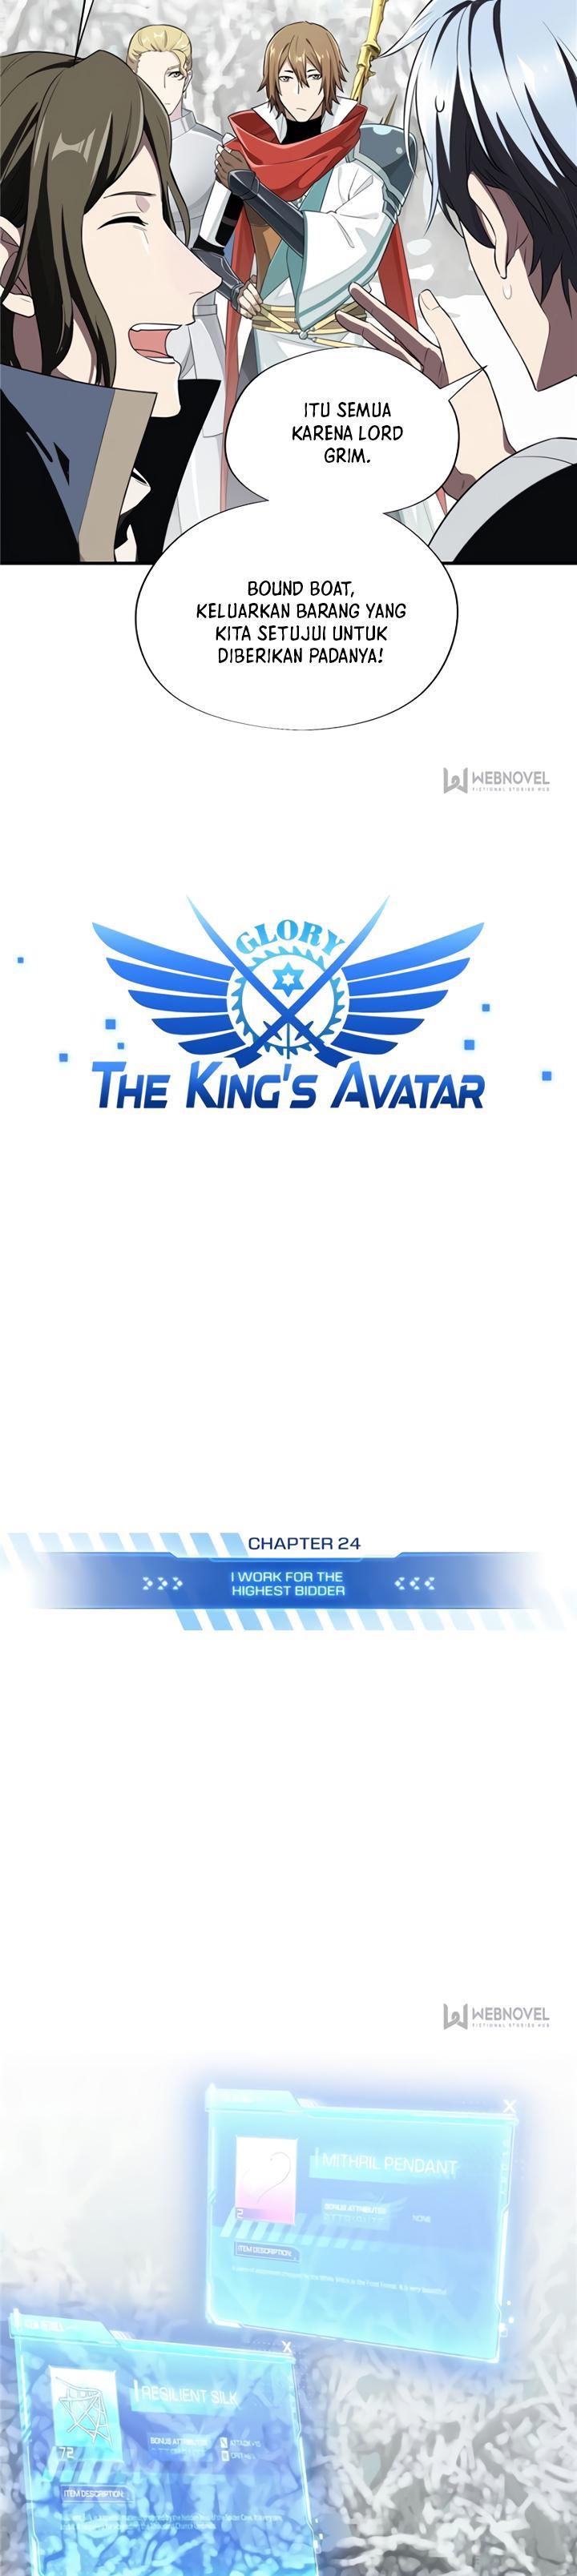 The King’s Avatar Chapter 24